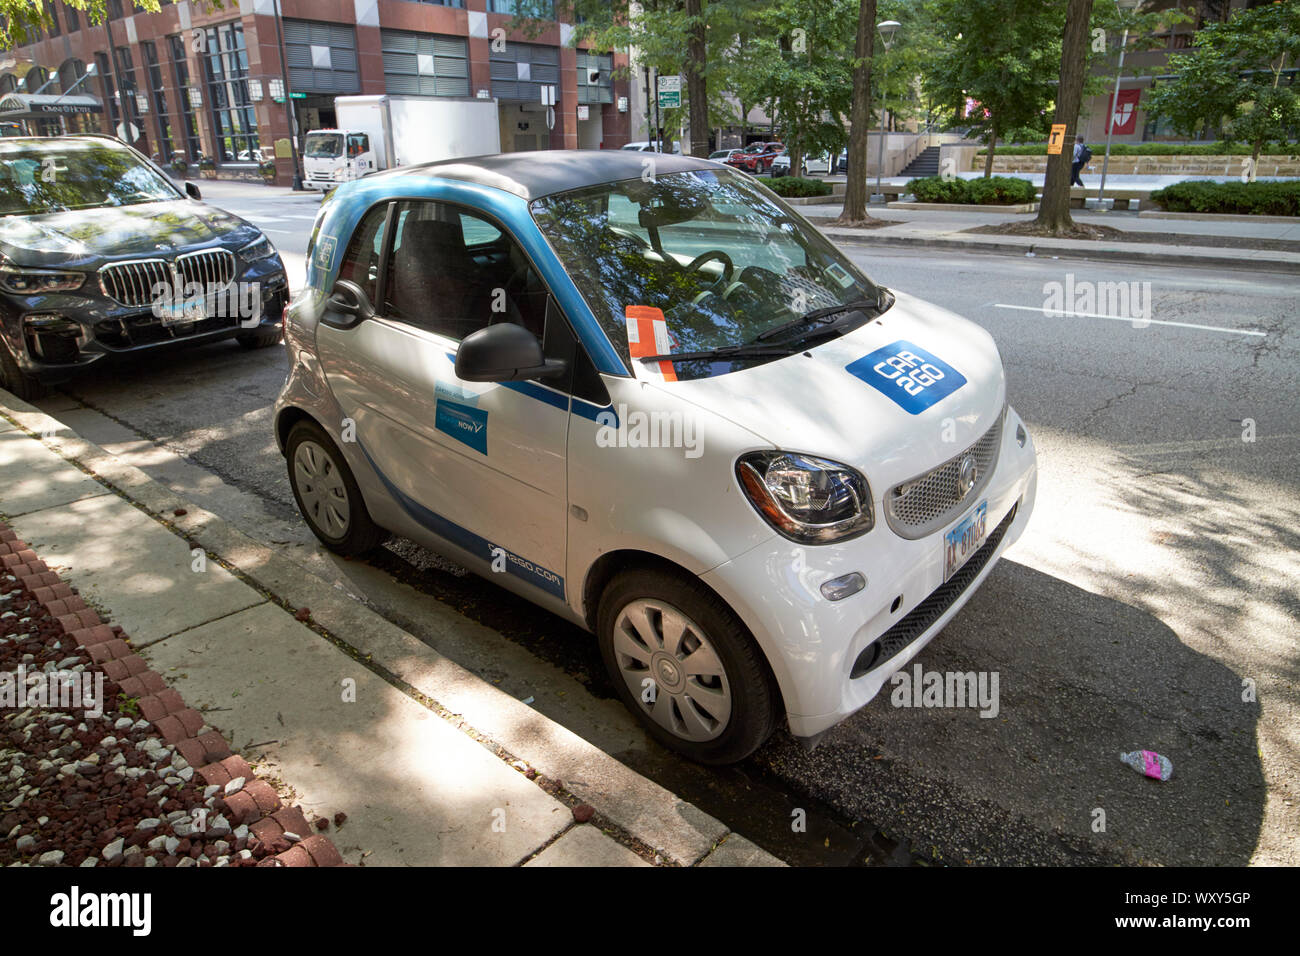 car 2 go car rental scheme car with parking ticket under the wiper blade on window parked in cleaning zone in downtown chicago illinois united states Stock Photo